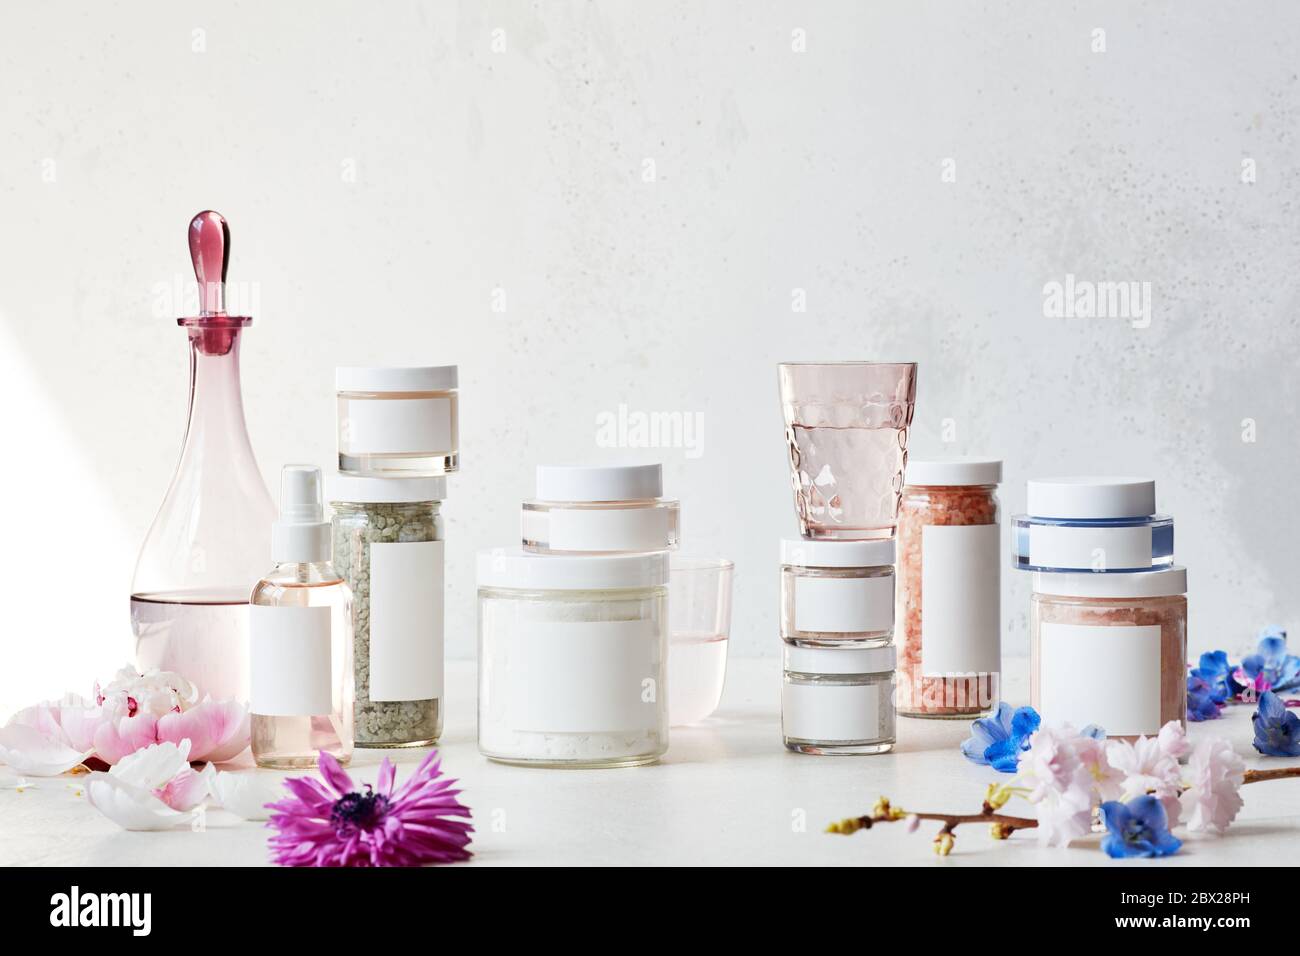 Still life display of skin care products Stock Photo